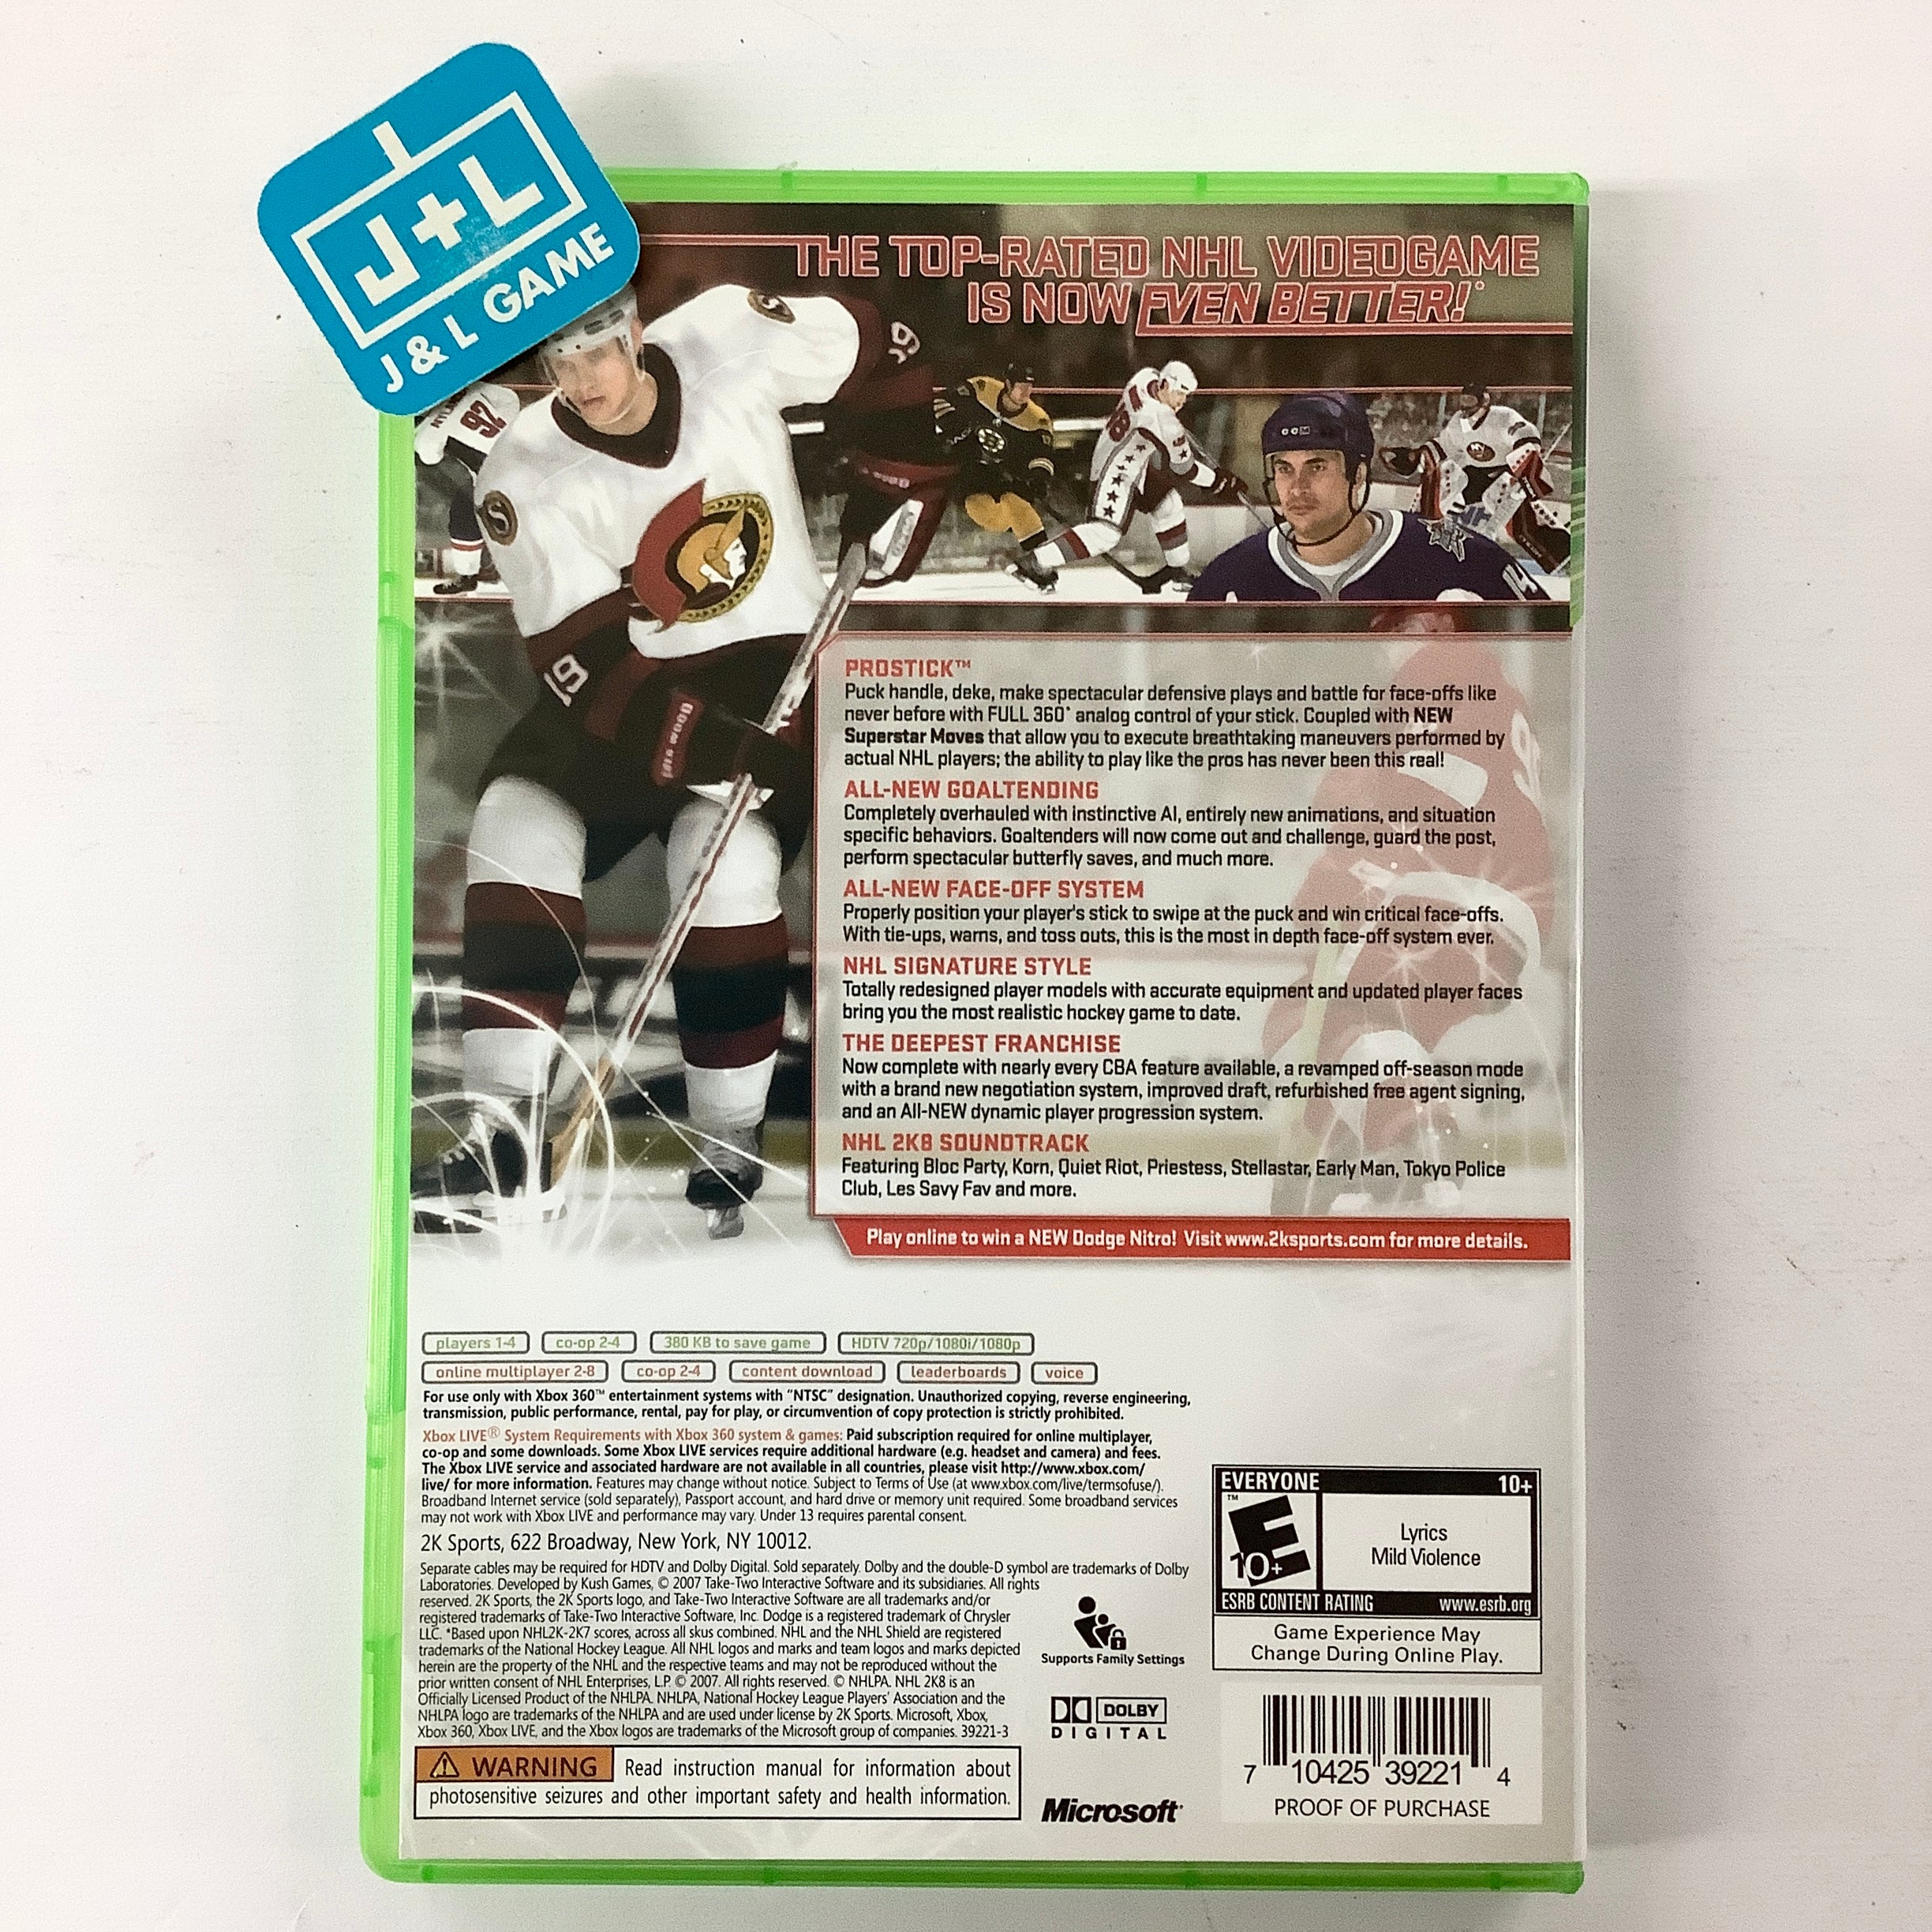 NHL 2K8 - Xbox 360 [Pre-Owned] Video Games Take-Two Interactive   